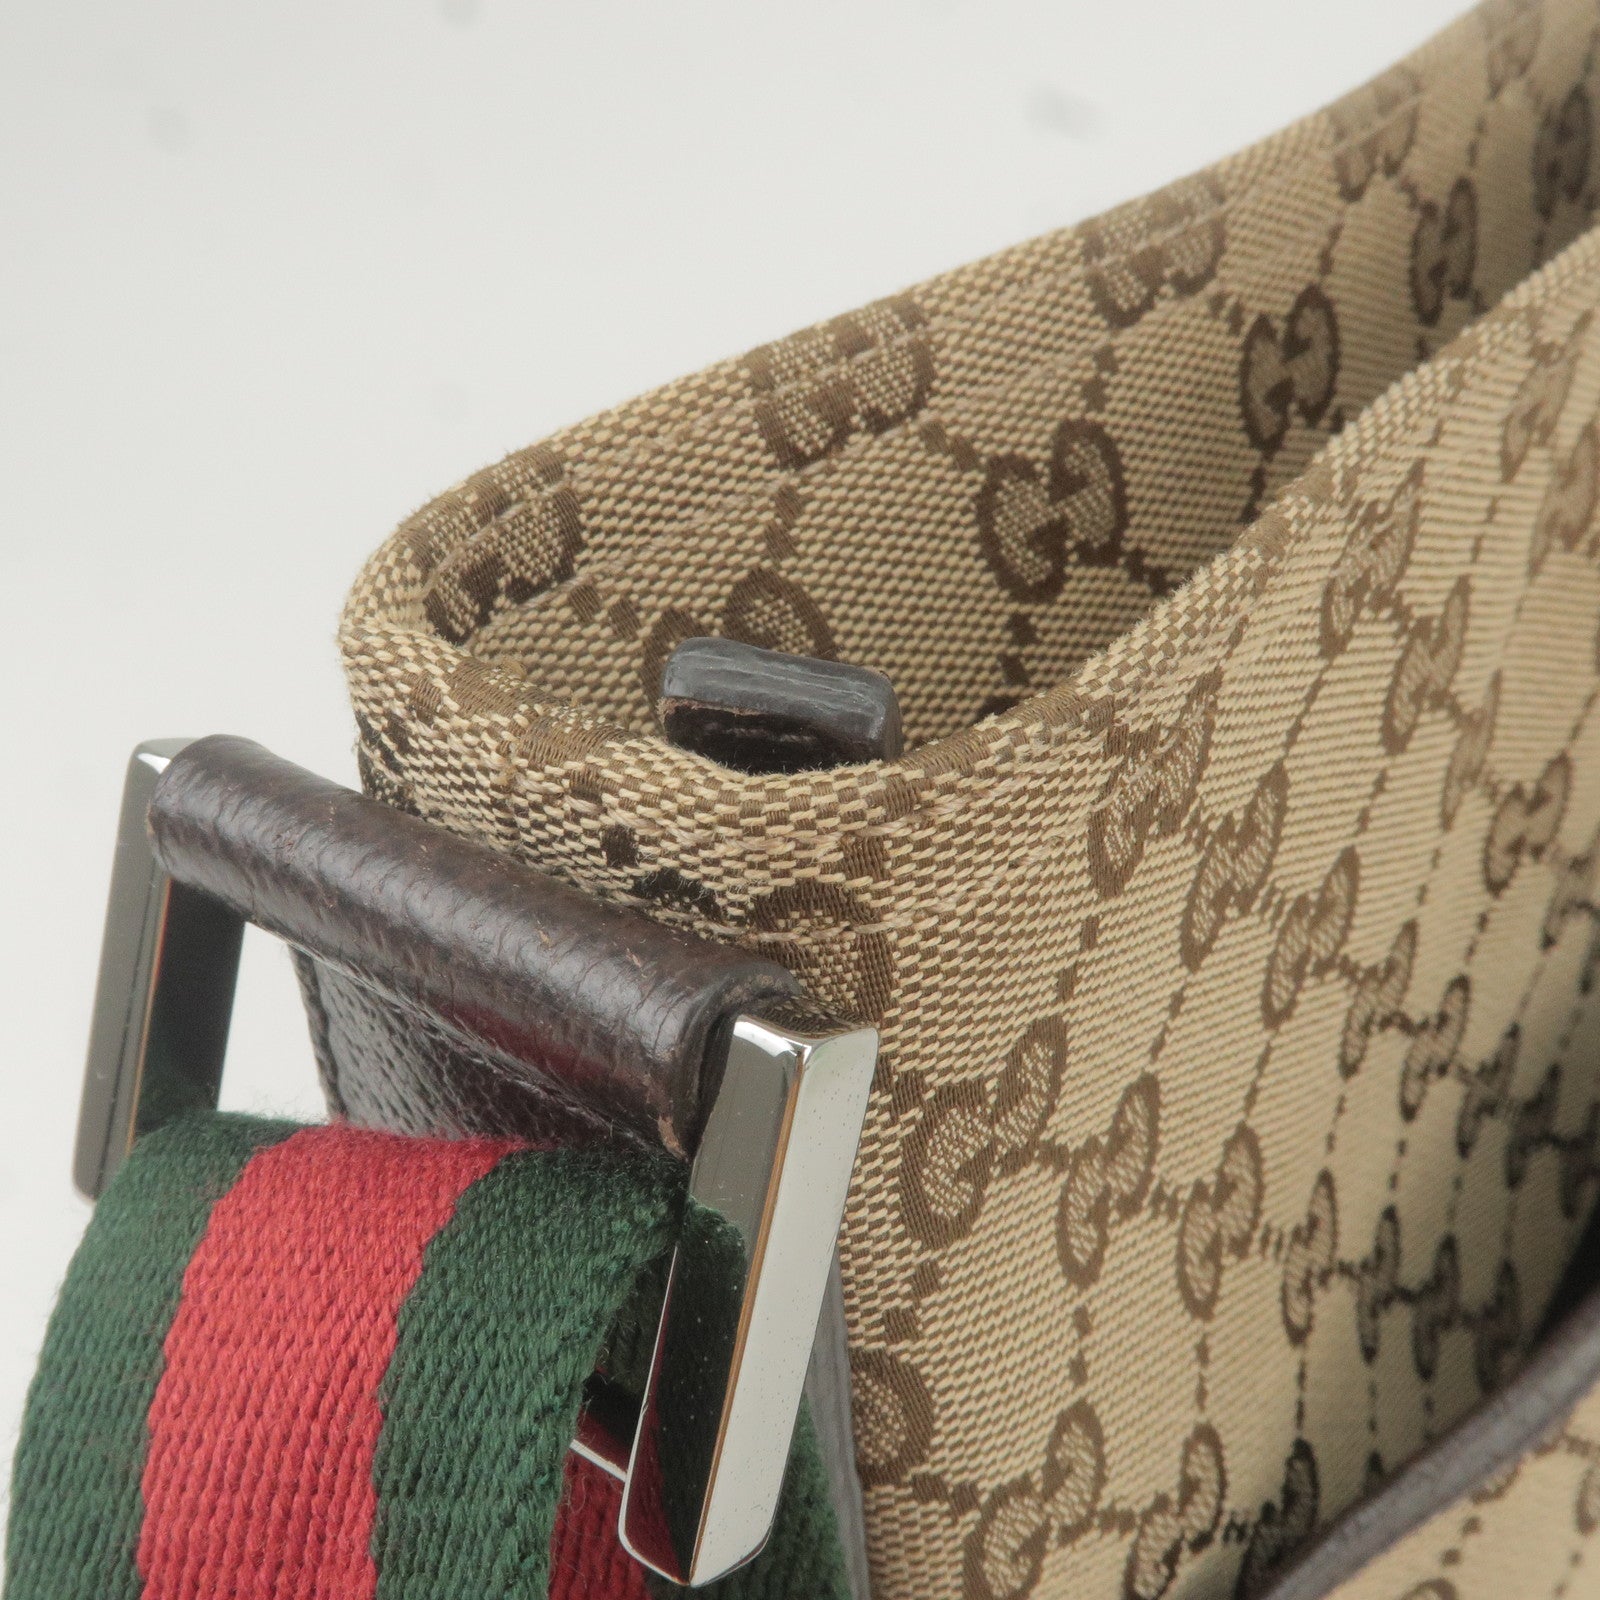 GUCCI-Sherry-Line-GG-Canvas-Leather-Shoulder-Bag-Beige-189751 –  dct-ep_vintage luxury Store